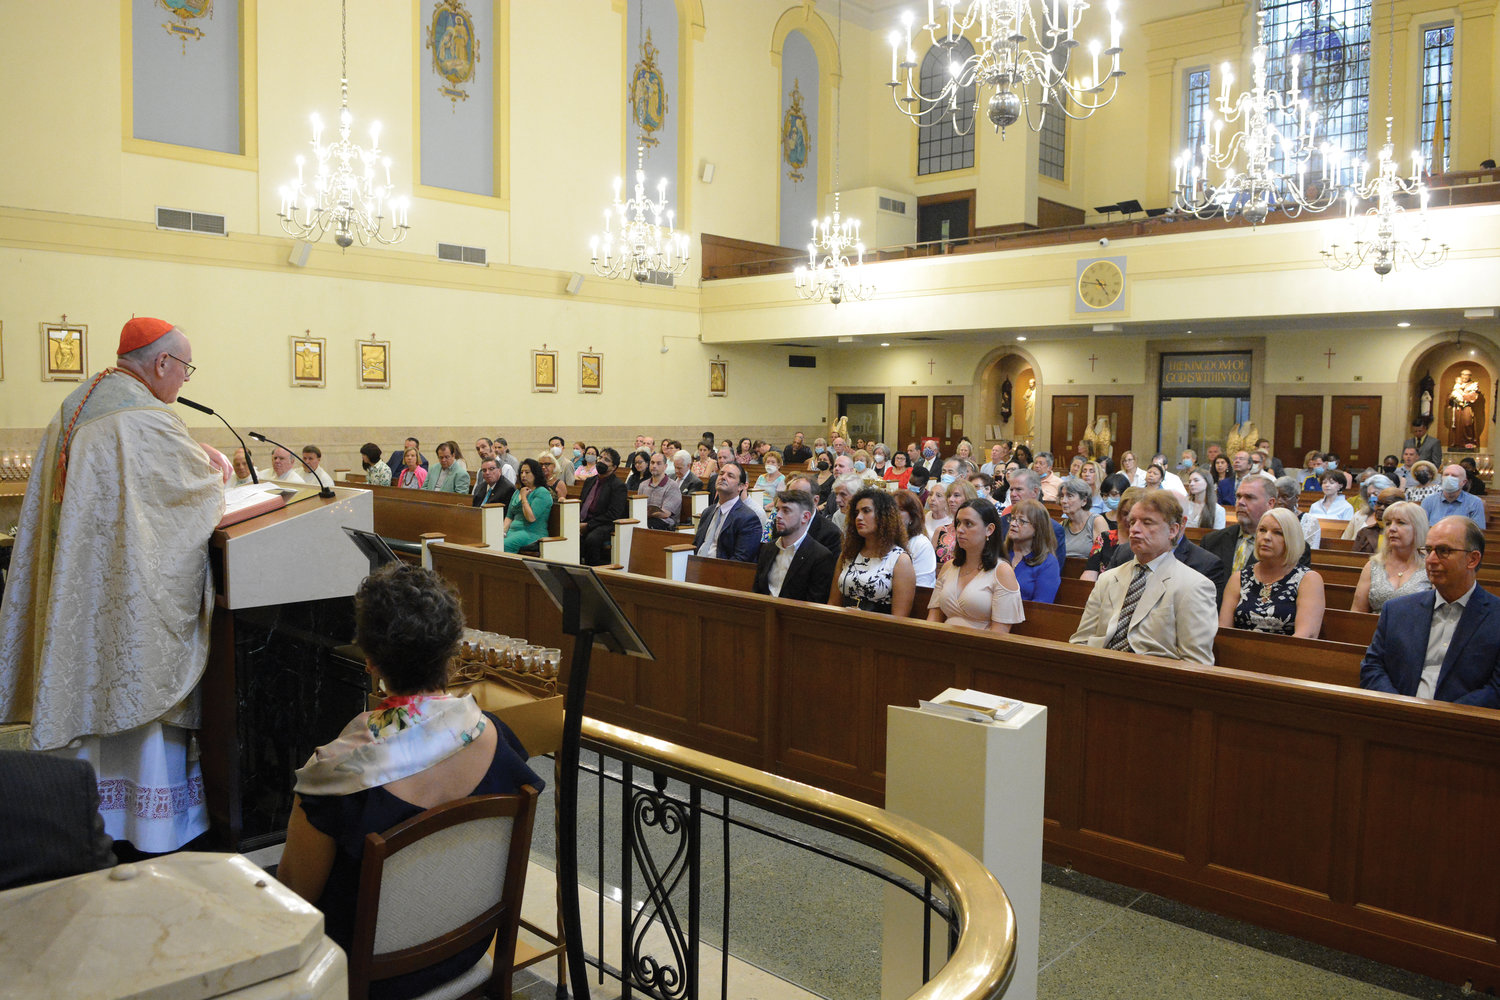 The congregation listens as Cardinal Dolan delivers his homily at the June 25 Mass celebrating the 75th anniversary of Our Lady of Victory Church in Manhattan’s Financial District.